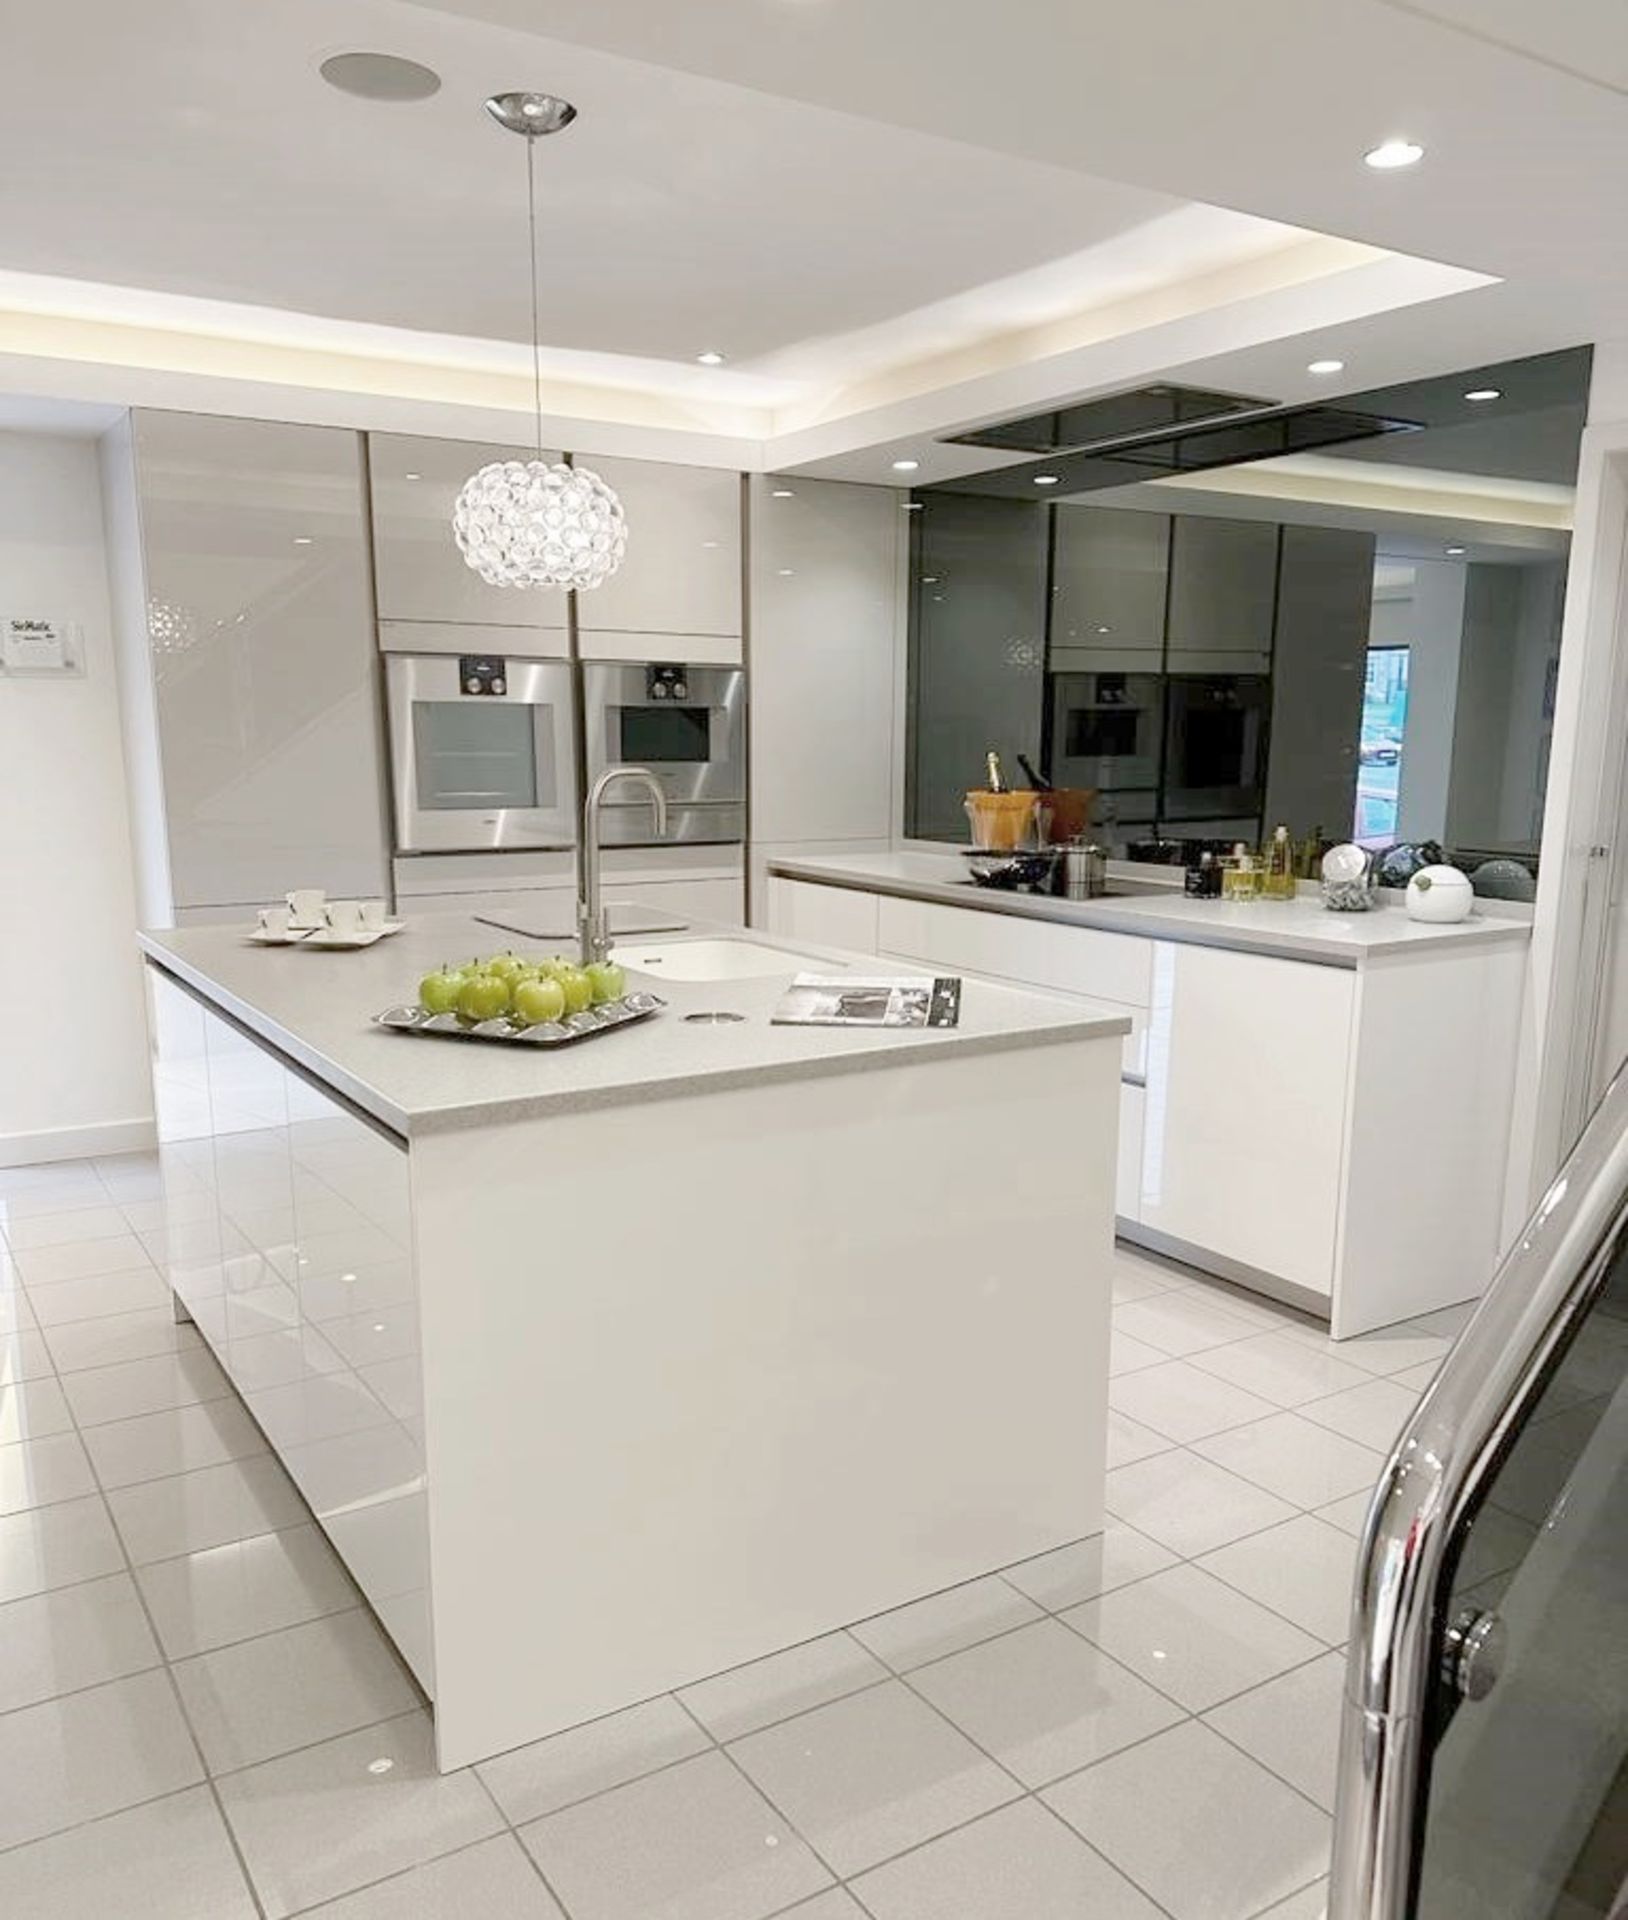 1 x SIEMATIC Contemporary 'S2' Fitted Kitchen In Gloss White And Grey *Ex-Display Showroom Model*